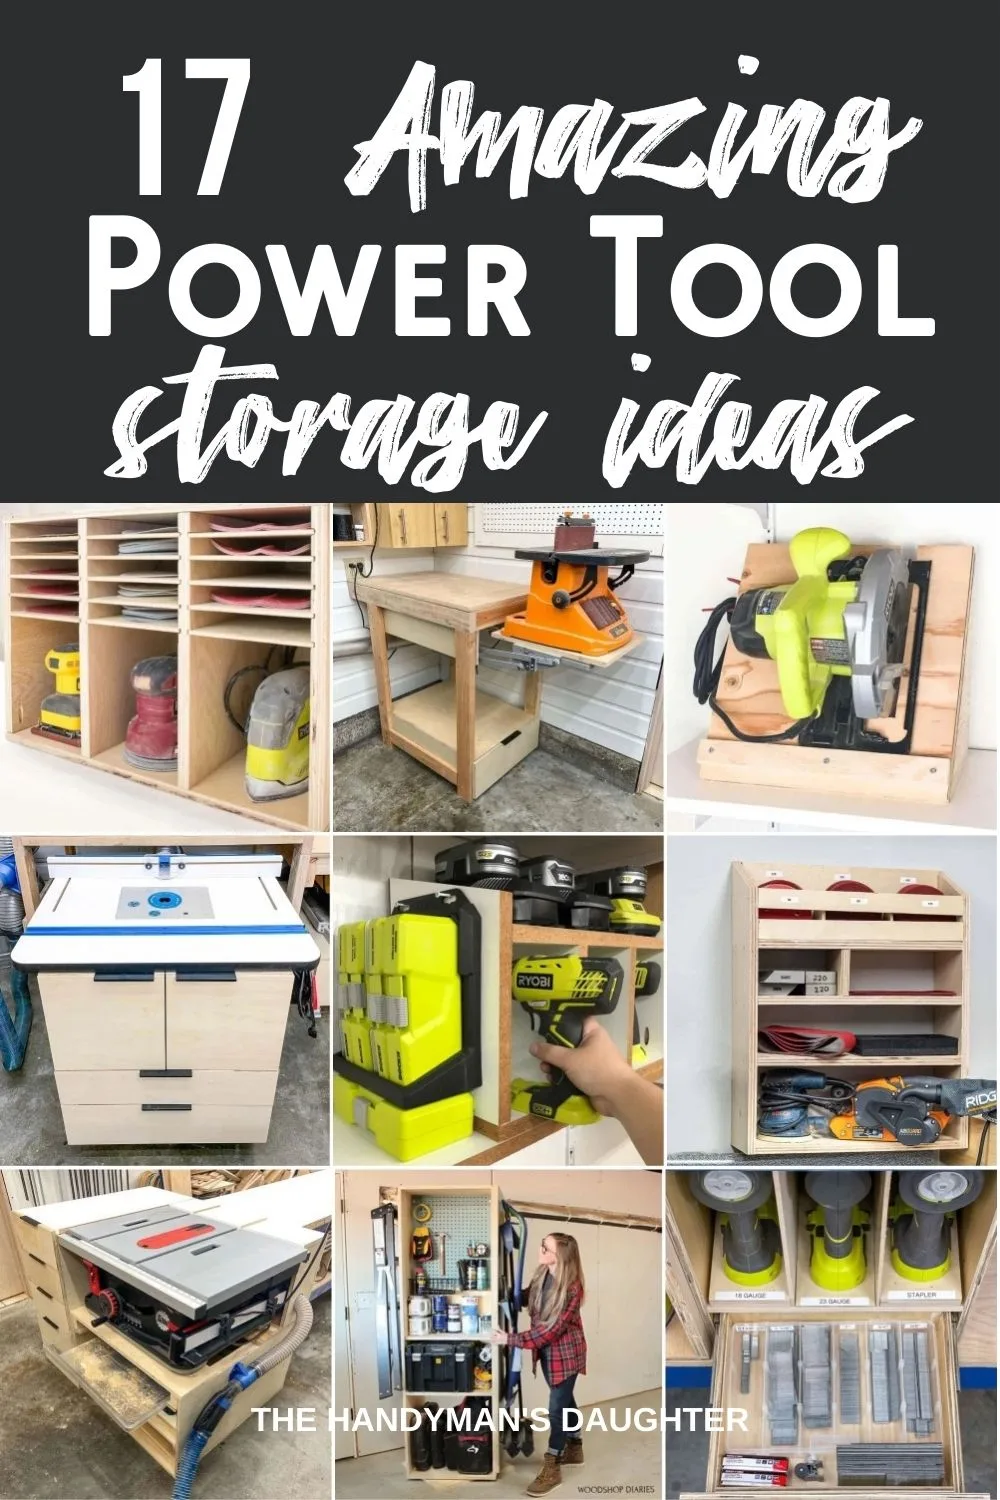 https://www.thehandymansdaughter.com/wp-content/uploads/2022/05/power-tool-storage-ideas-The-Handymans-Daughter-Pin.jpg.webp